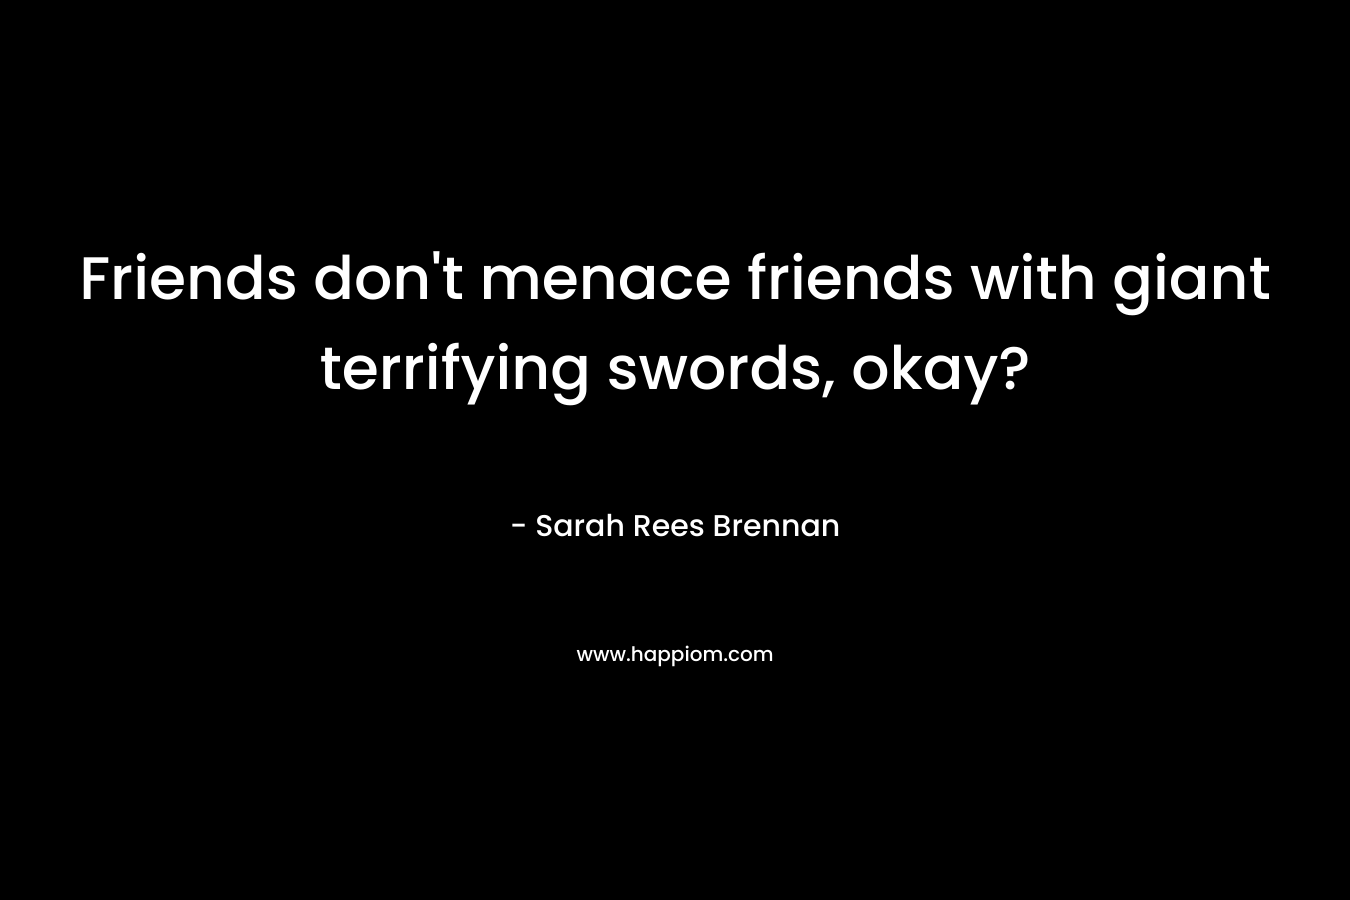 Friends don't menace friends with giant terrifying swords, okay?